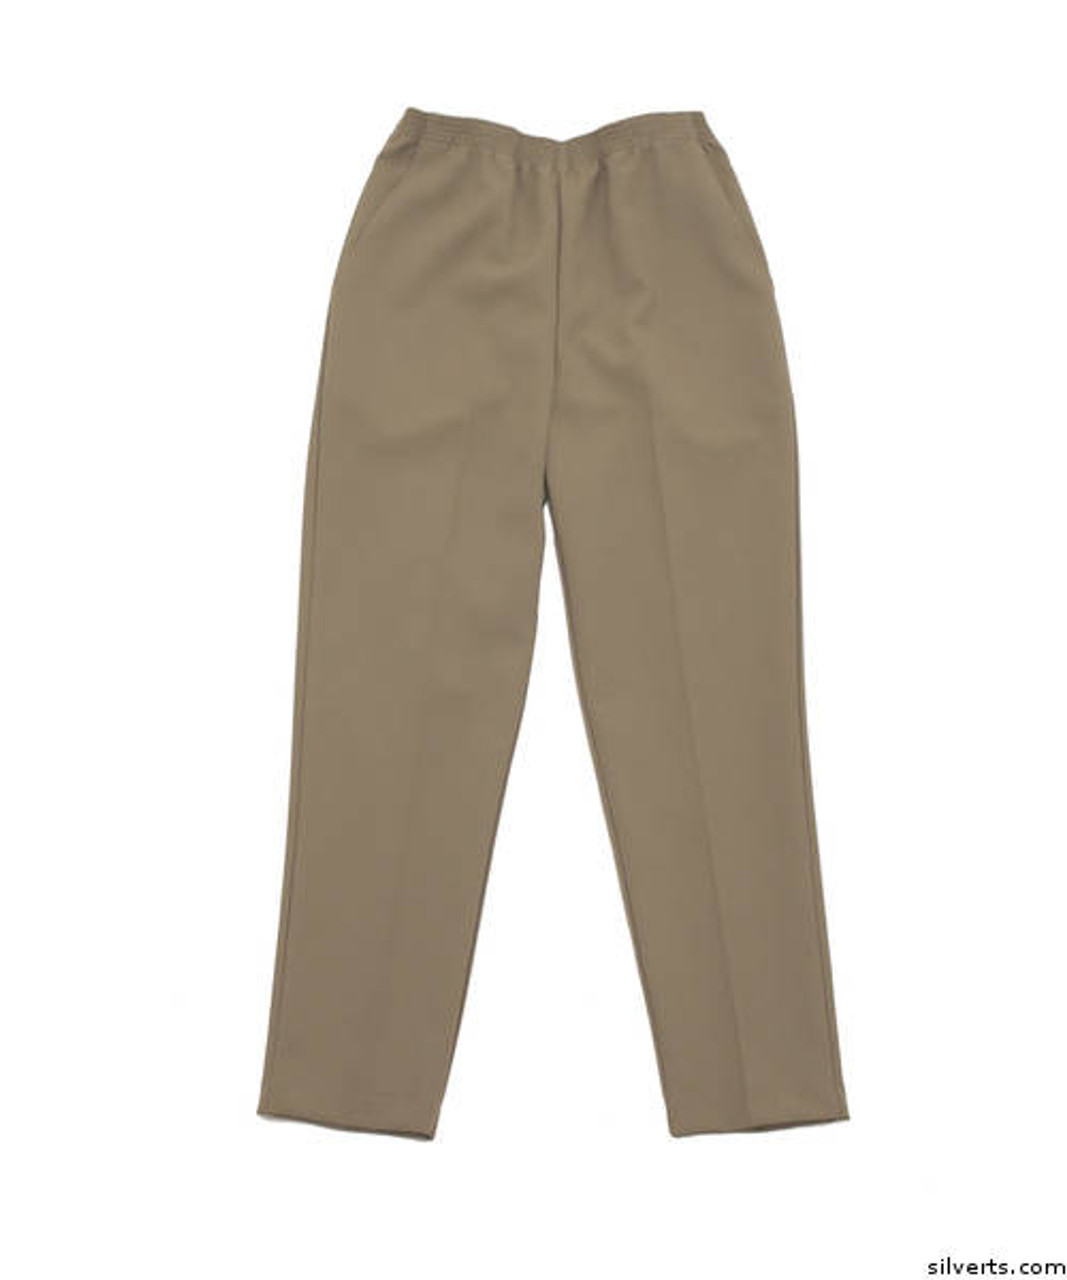 Silvert's 130900502 Womens Elastic Waist Polyester Pants 2 Pockets , Size 10, TAUPE